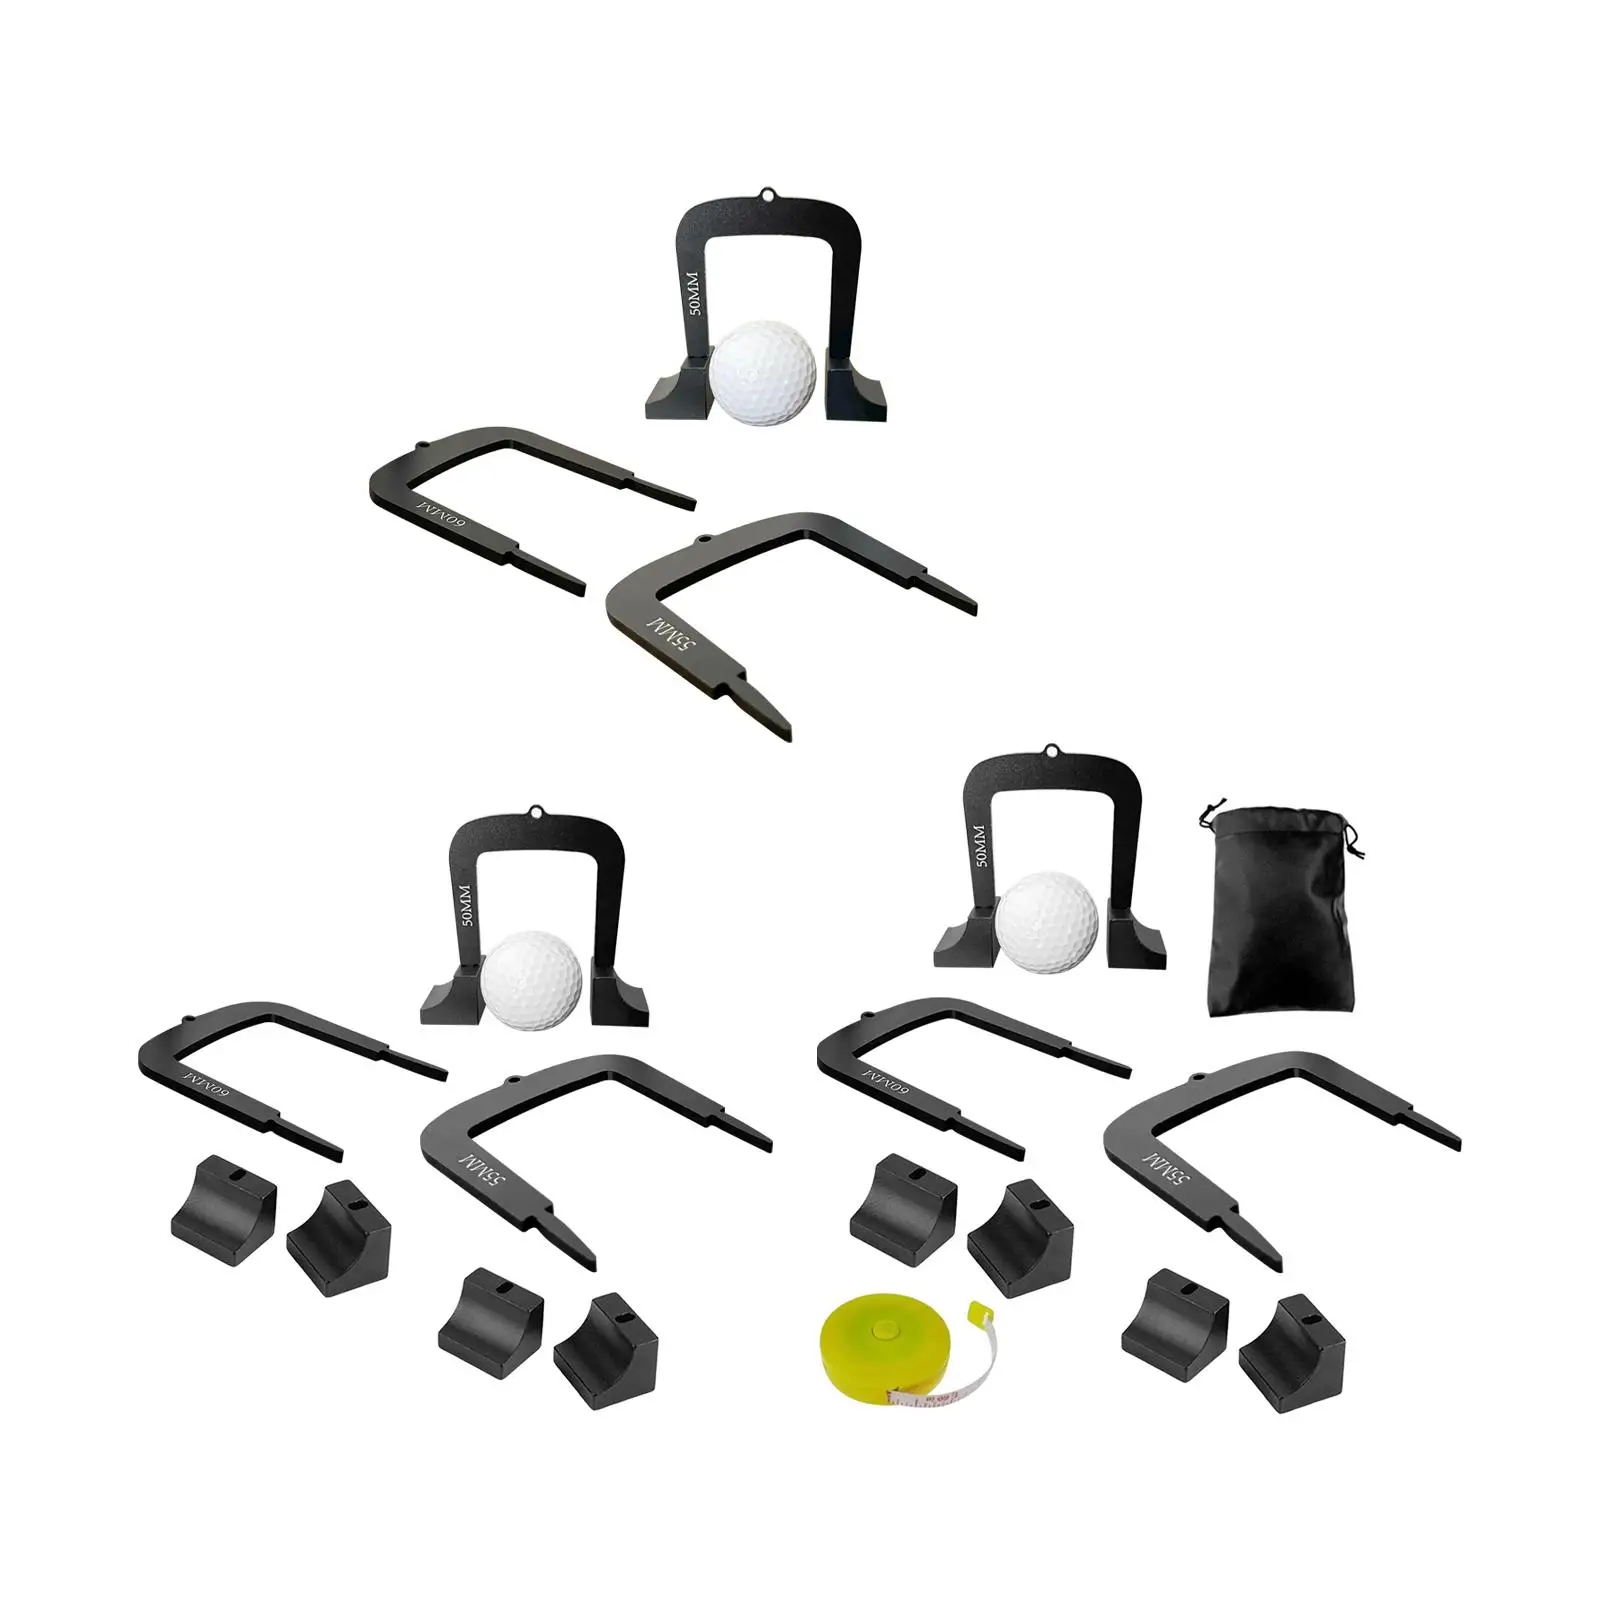 3x Golf Putting Gates Golf Training Equipment for Putt Alignment & Control Metal Putter Target for Indoor Outdoor with Bases